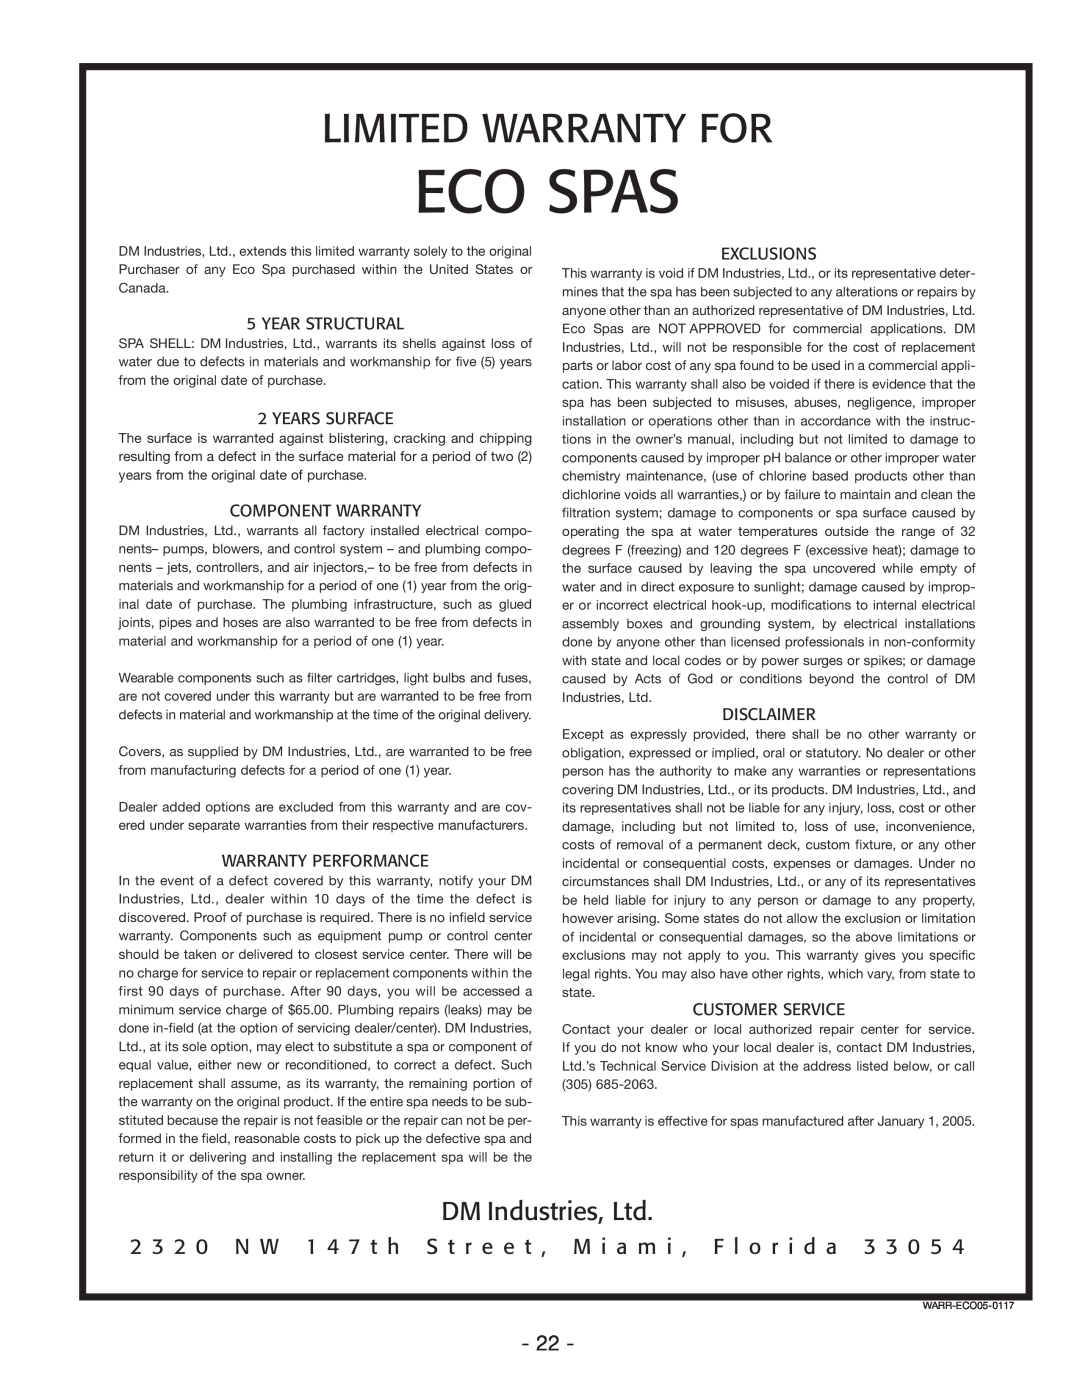 Vita Spa U -1 3 0 manual Eco Spas, Limited Warranty For, Exclusions, Year Structural, Years Surface, Component Warranty 